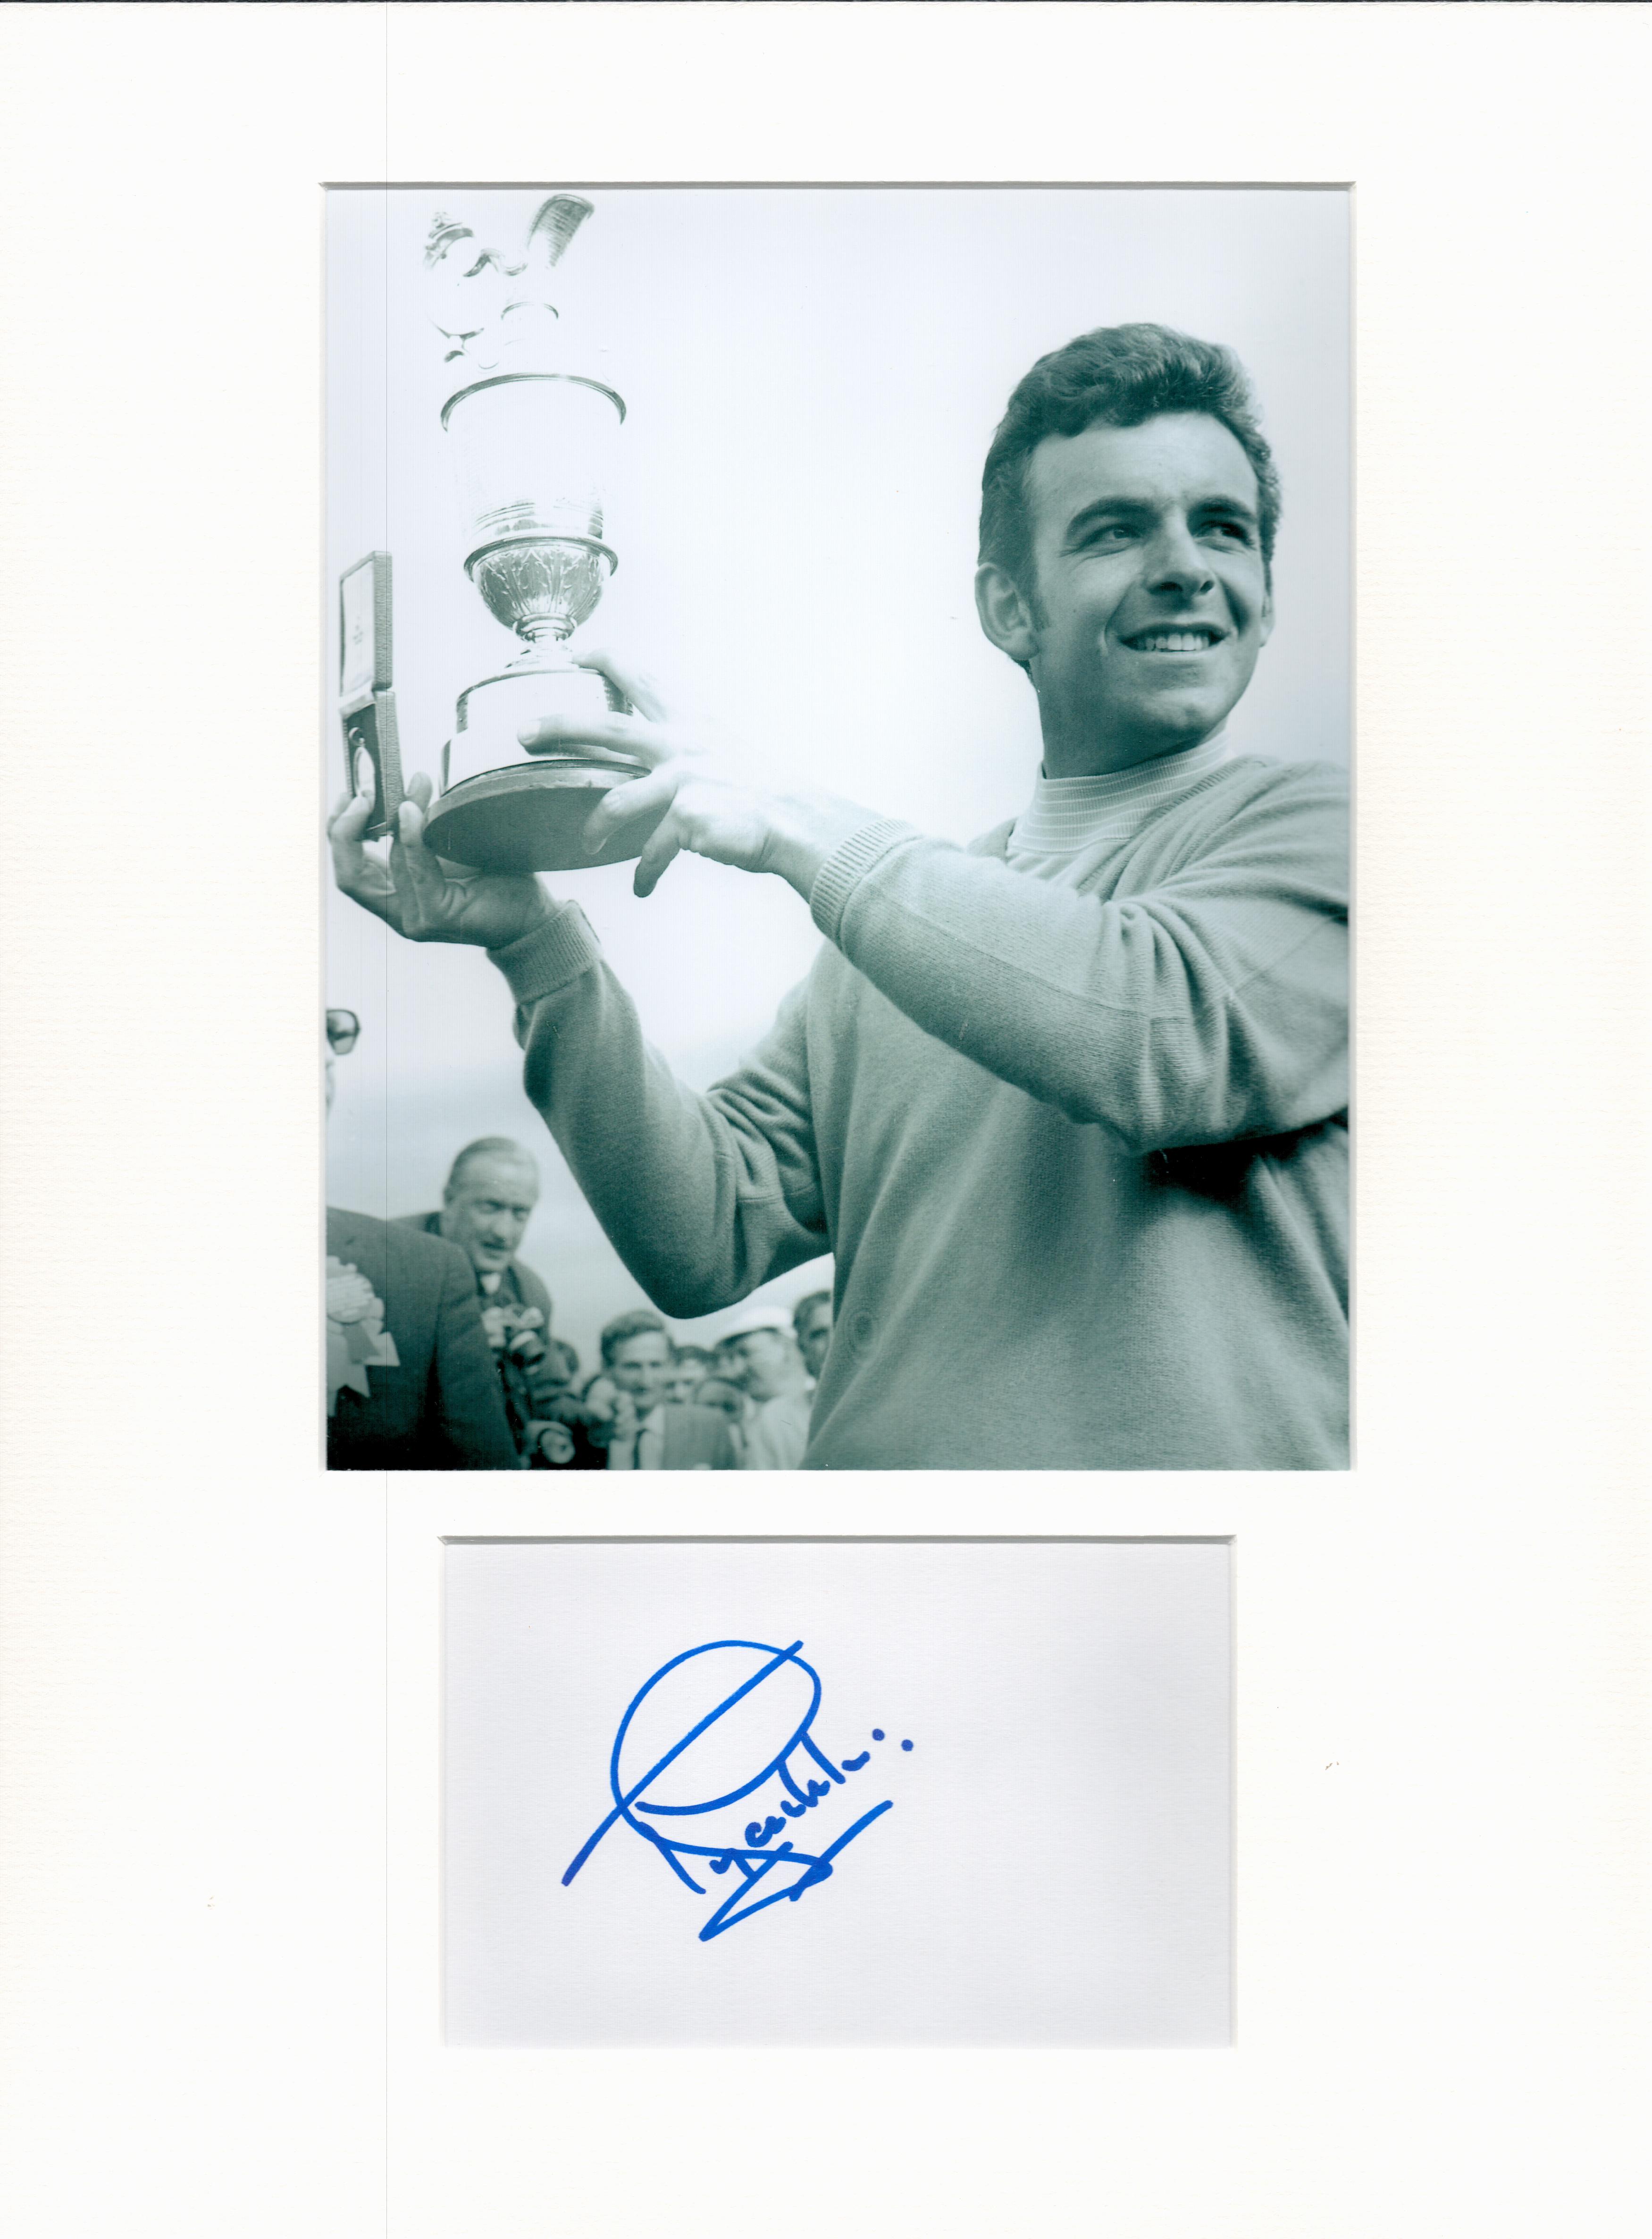 Golf Tony Jacklin 16x12 overall mounted signature piece includes a signed album page and a superb